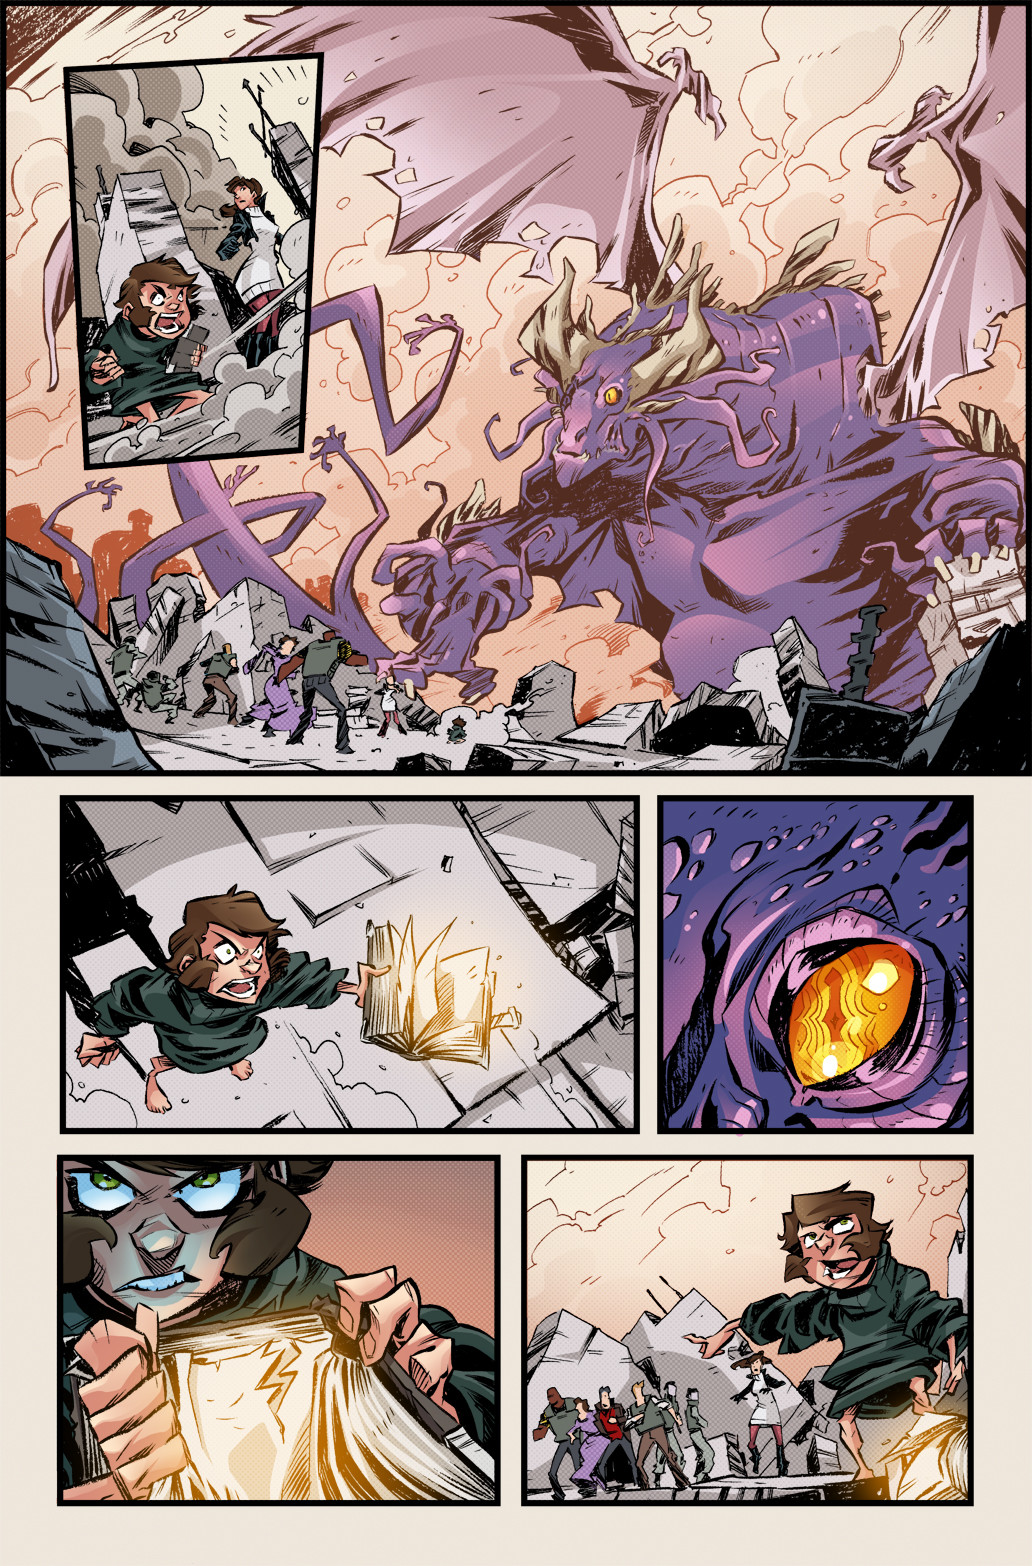 GONERS - #6, page 12